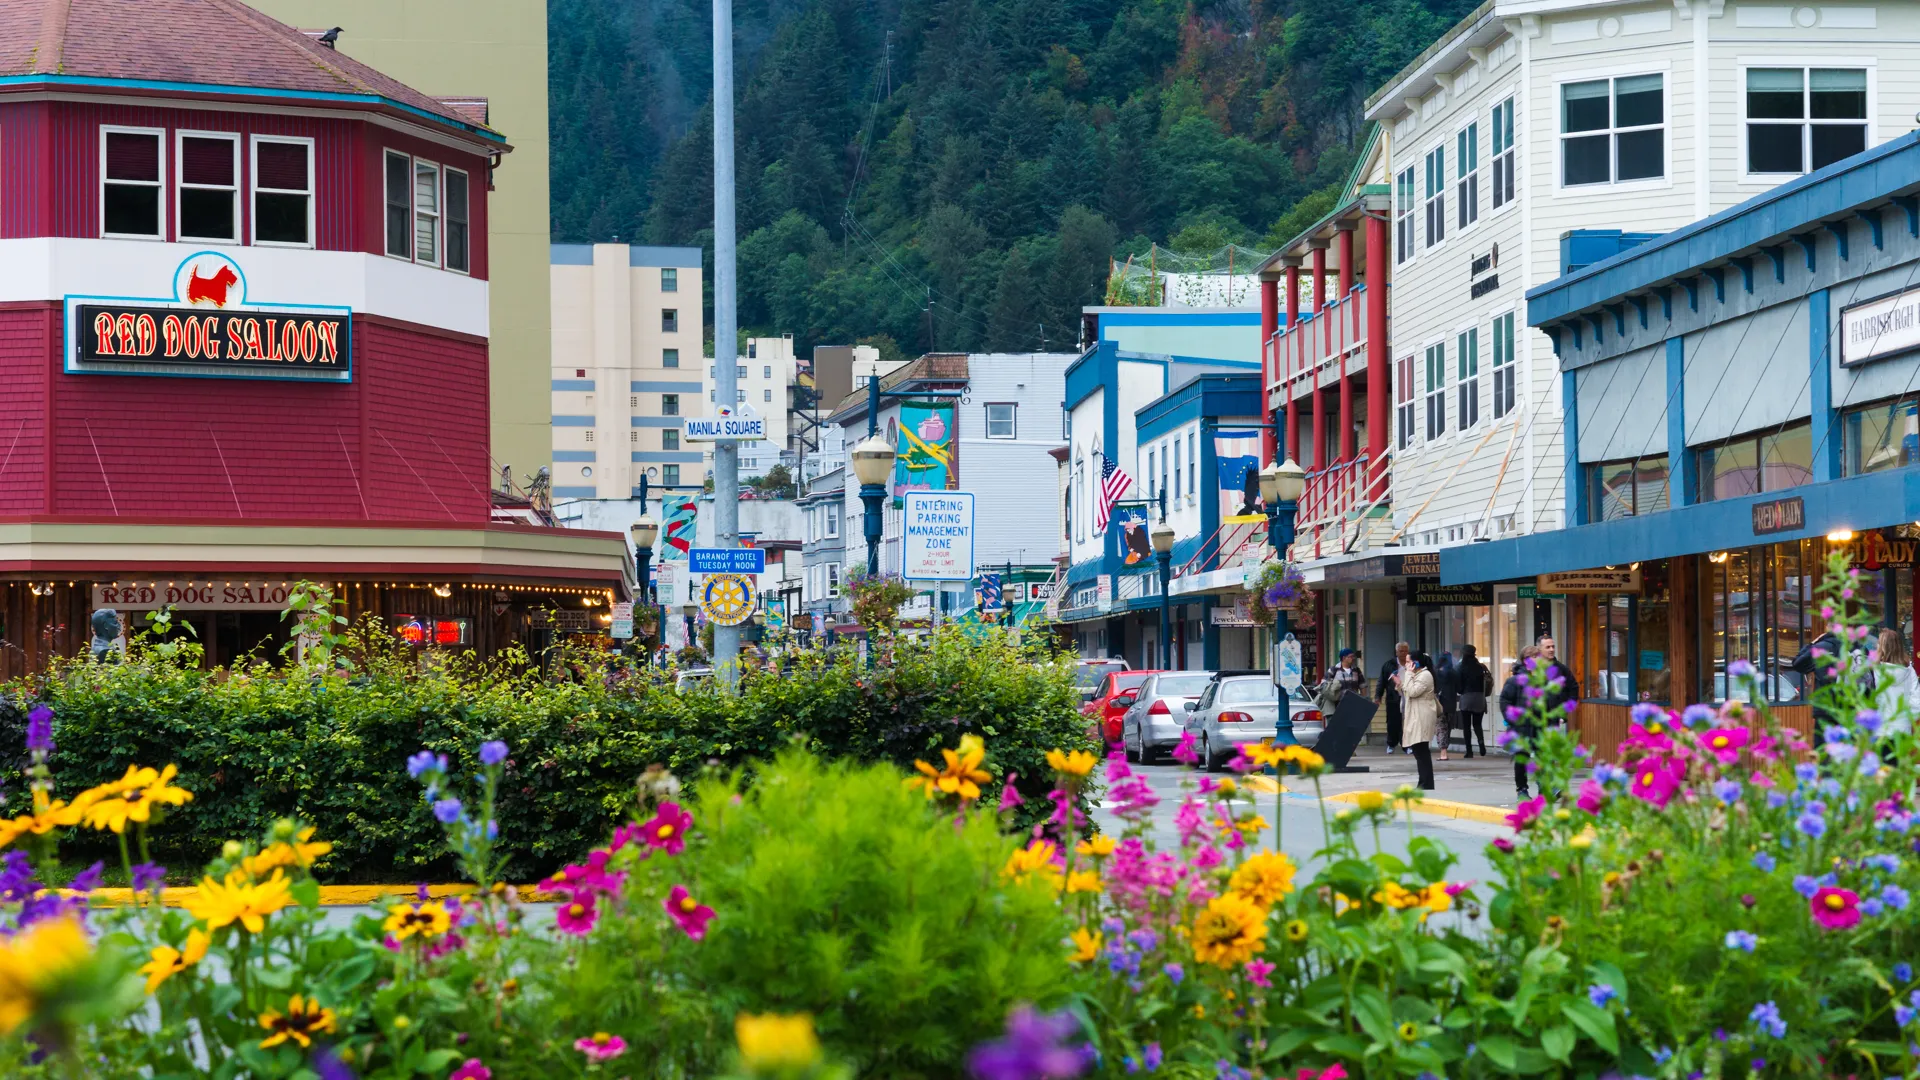 Alaska, USA - August 12, 2016: Downtown Juneau with flowers in the foreground with painted wooden storefront buildings and the Red Dog Saloon.